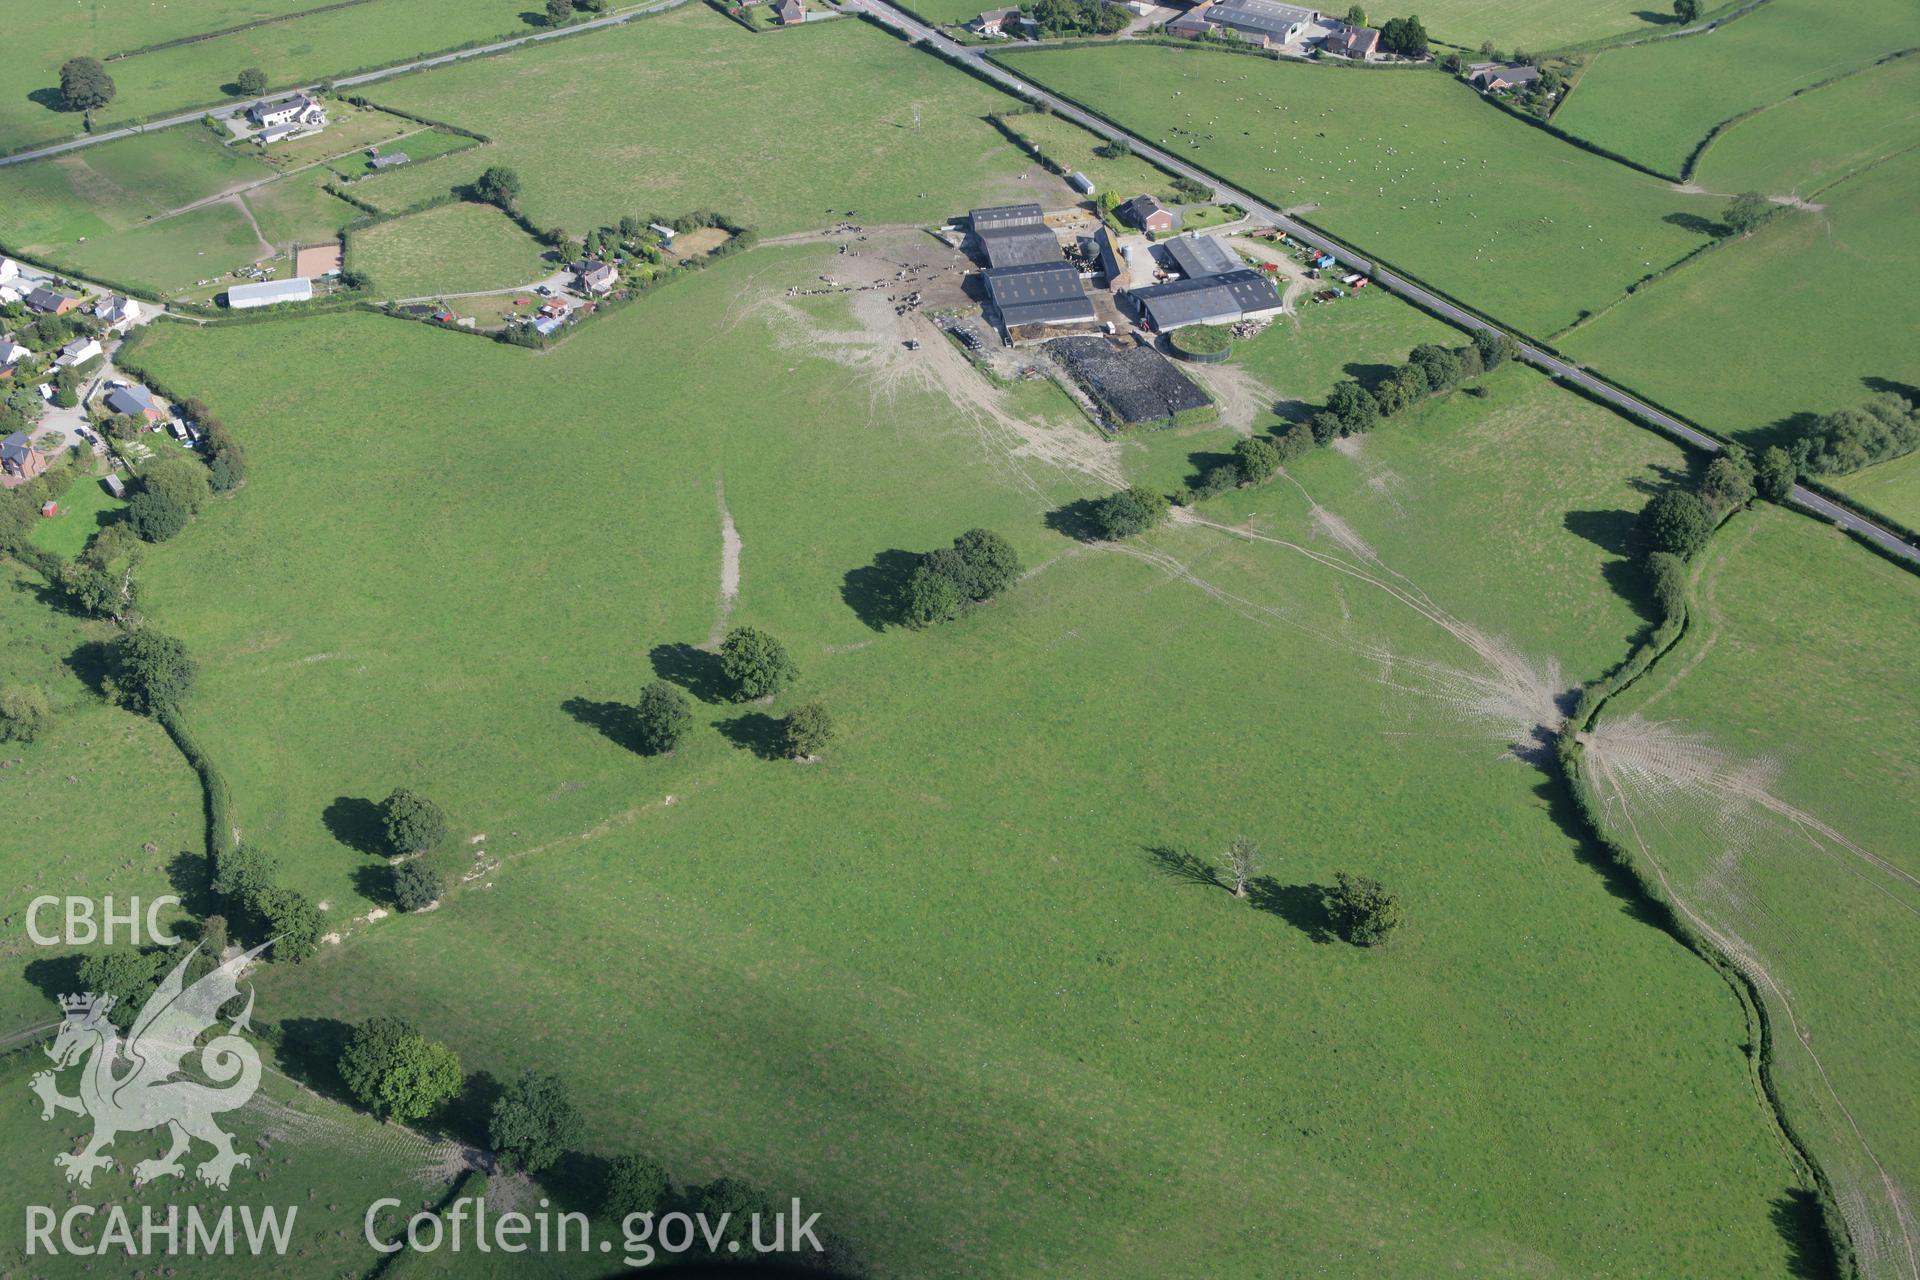 RCAHMW colour oblique aerial photograph of a section of Offa's Dyke extending 3000m southeast to Bele Brook, Llandrinio. Taken on 06 September 2007 by Toby Driver